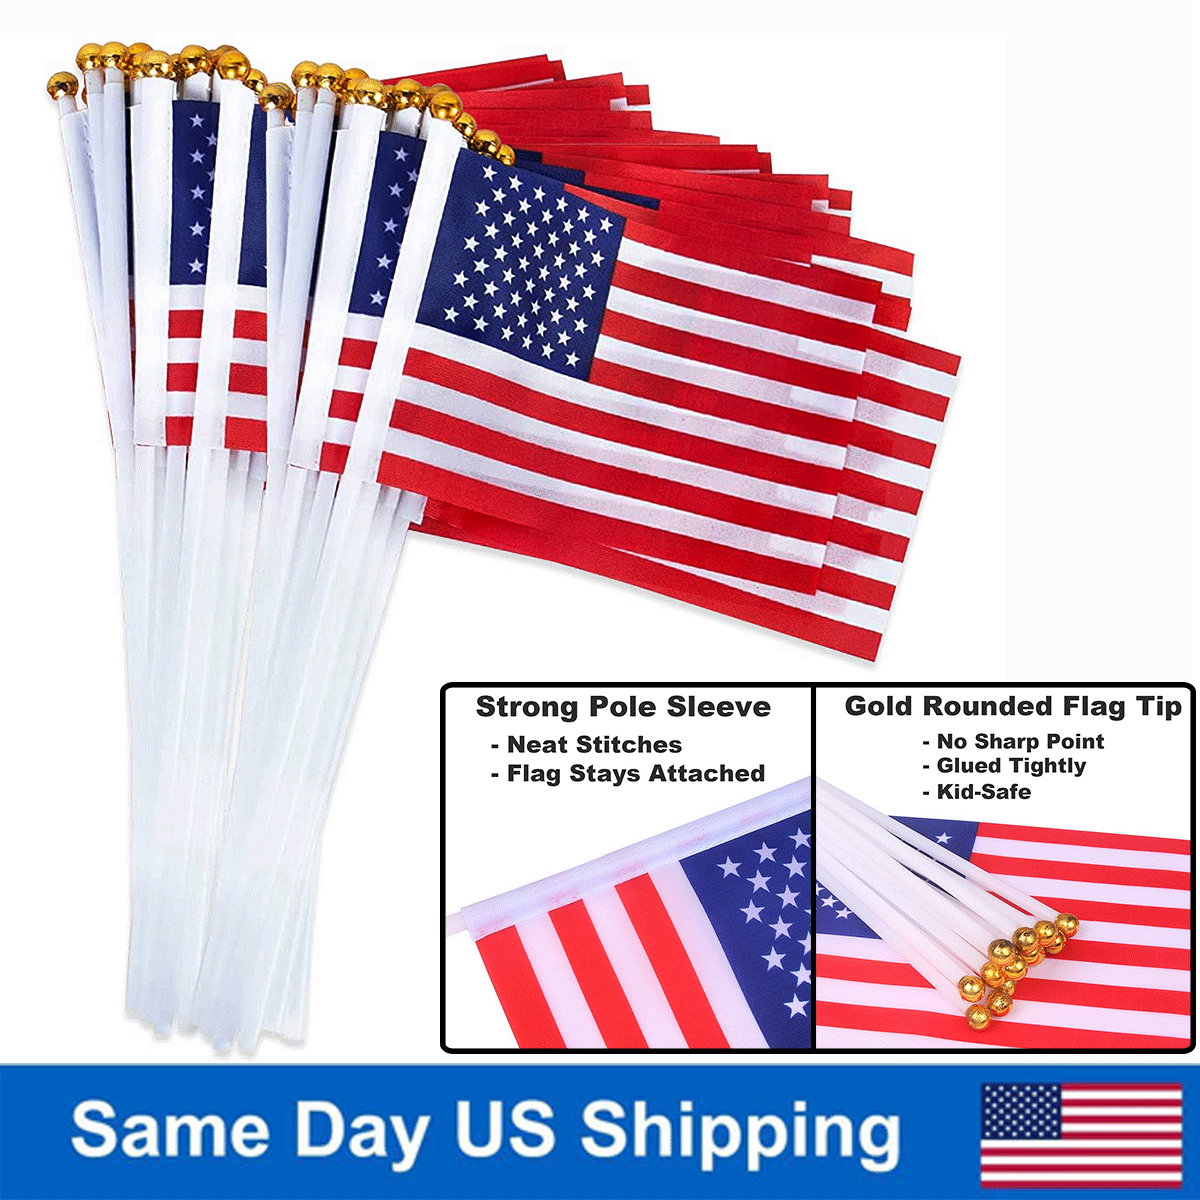 Small US Flags Mini American Flag on Stick 5" x 8" In 50Pcs Small American Flags Unbranded Does not apply